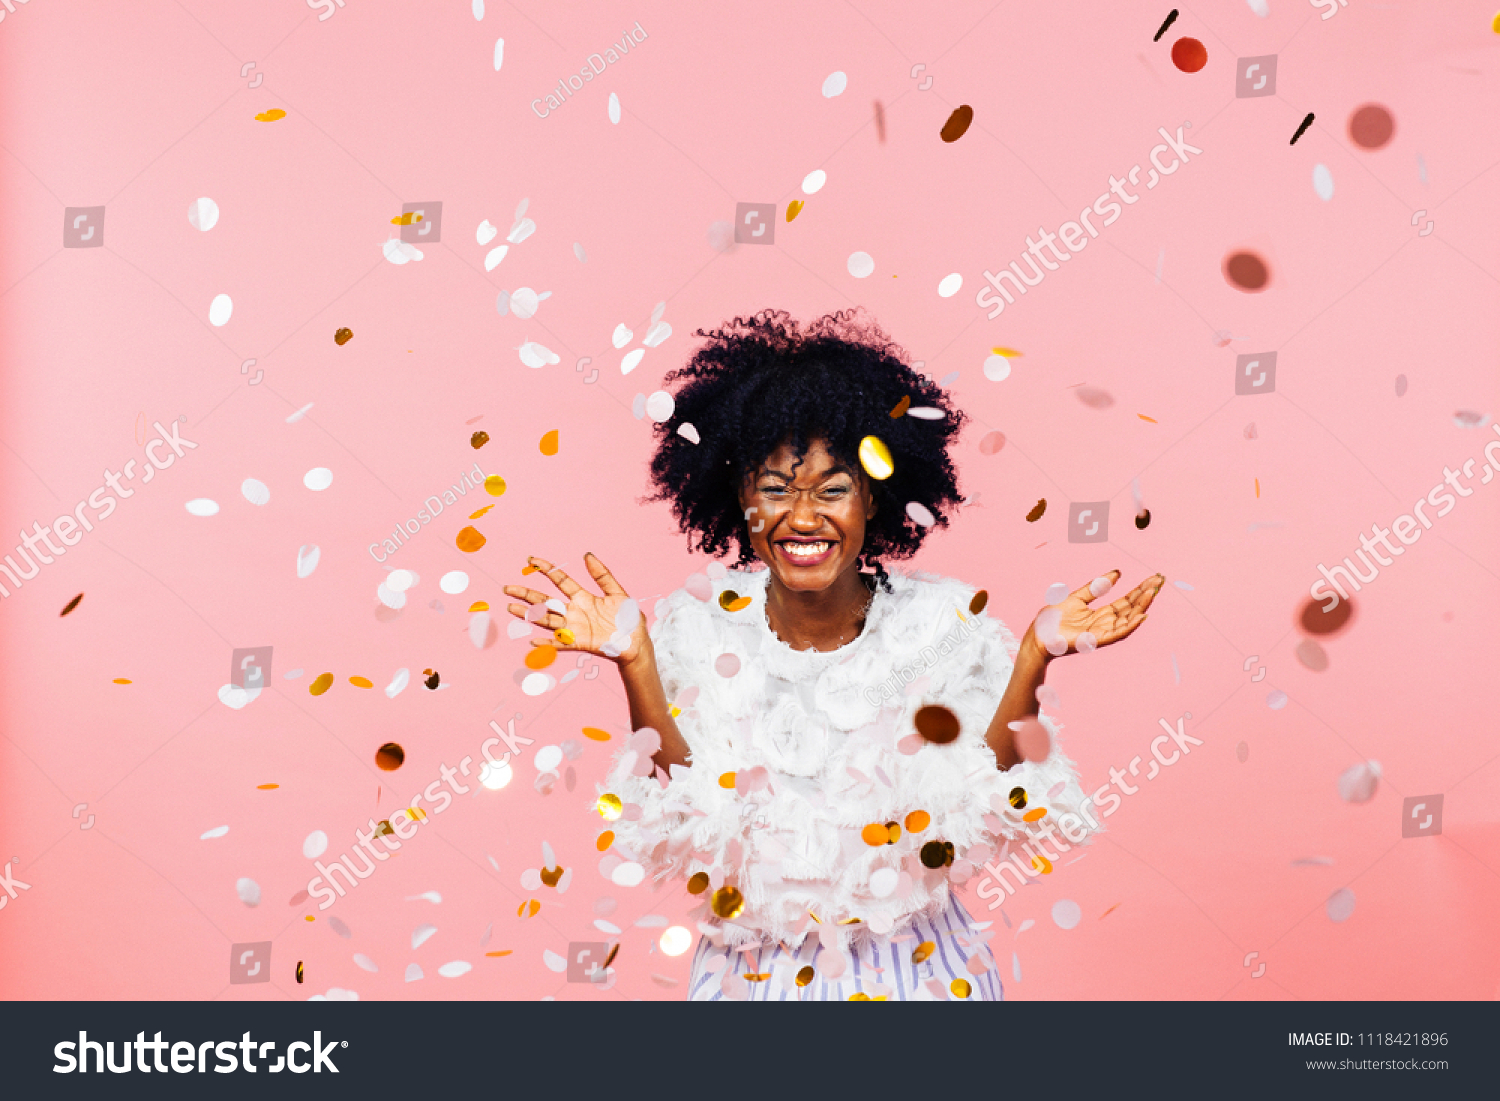 Celebrating happiness, young woman with big smile throwing confetti	
 #1118421896